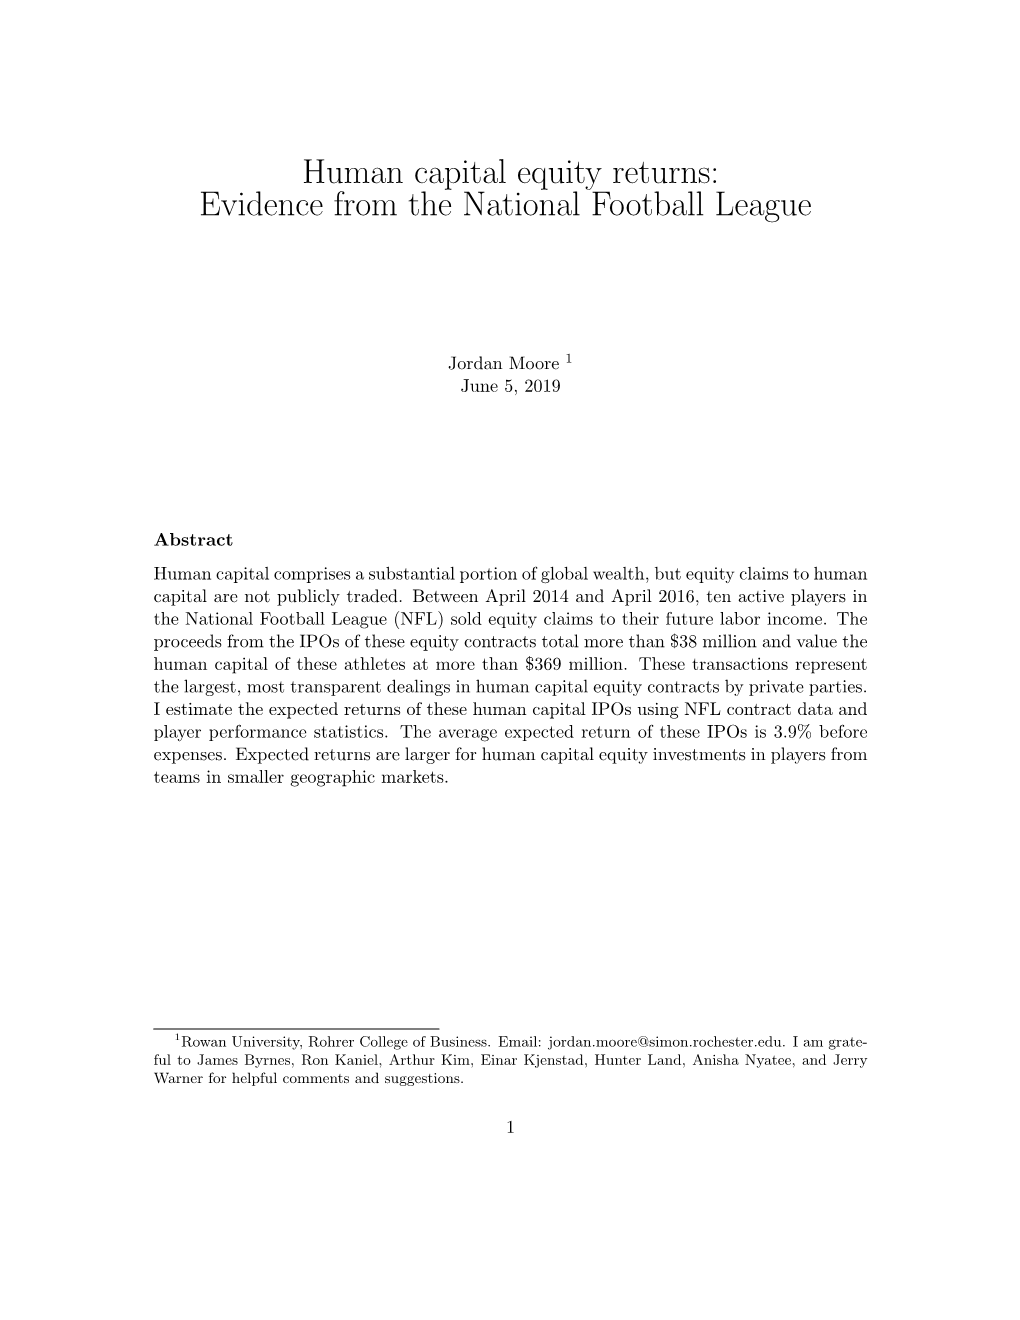 Human Capital Equity Returns: Evidence from the National Football League